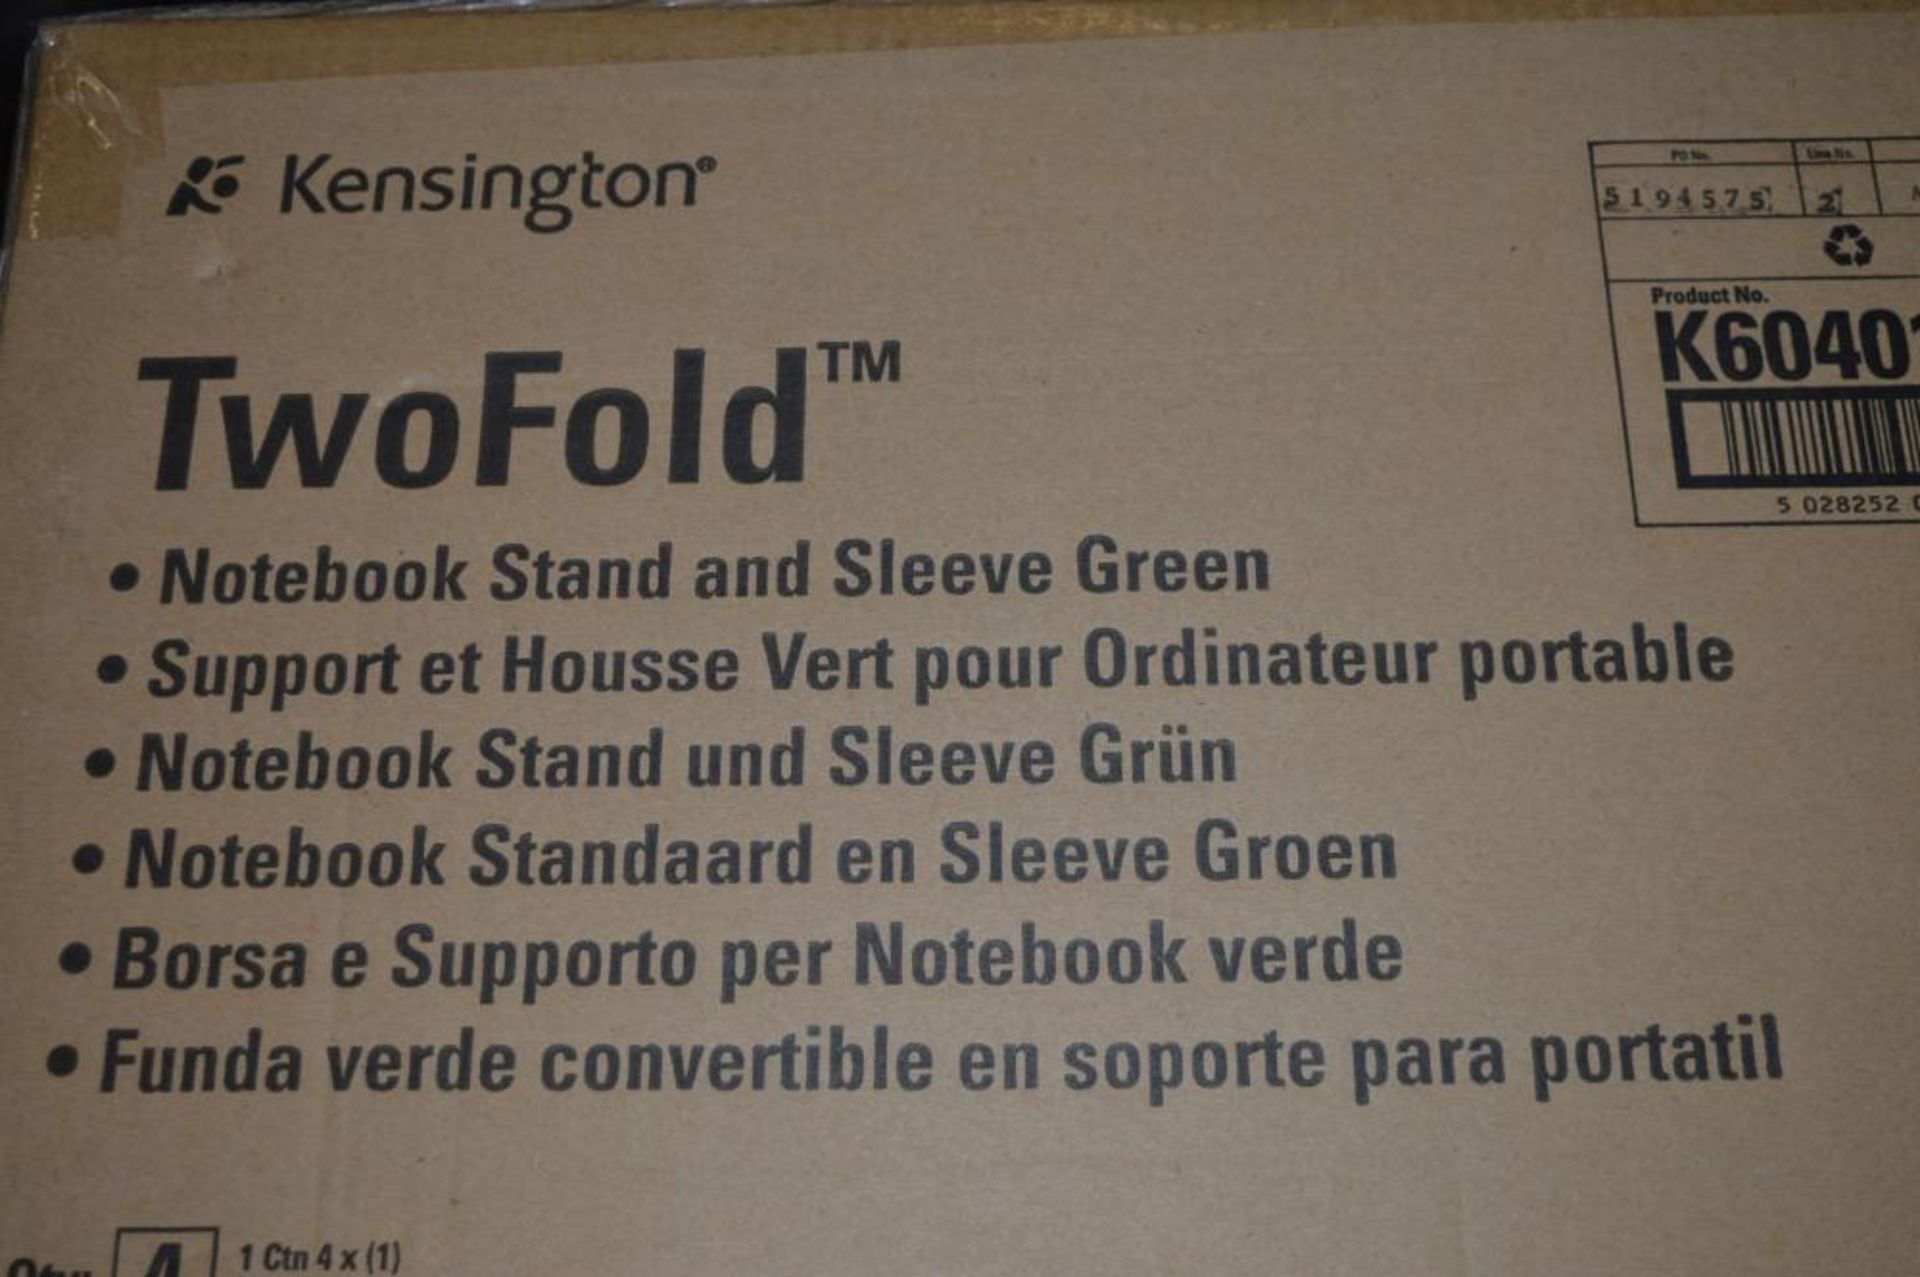 4 x Kensington TwoFold Laptop Stand Cases - Suitable For Laptops Upto 15.4" - Stylish Laptop Sleeve - Image 5 of 10